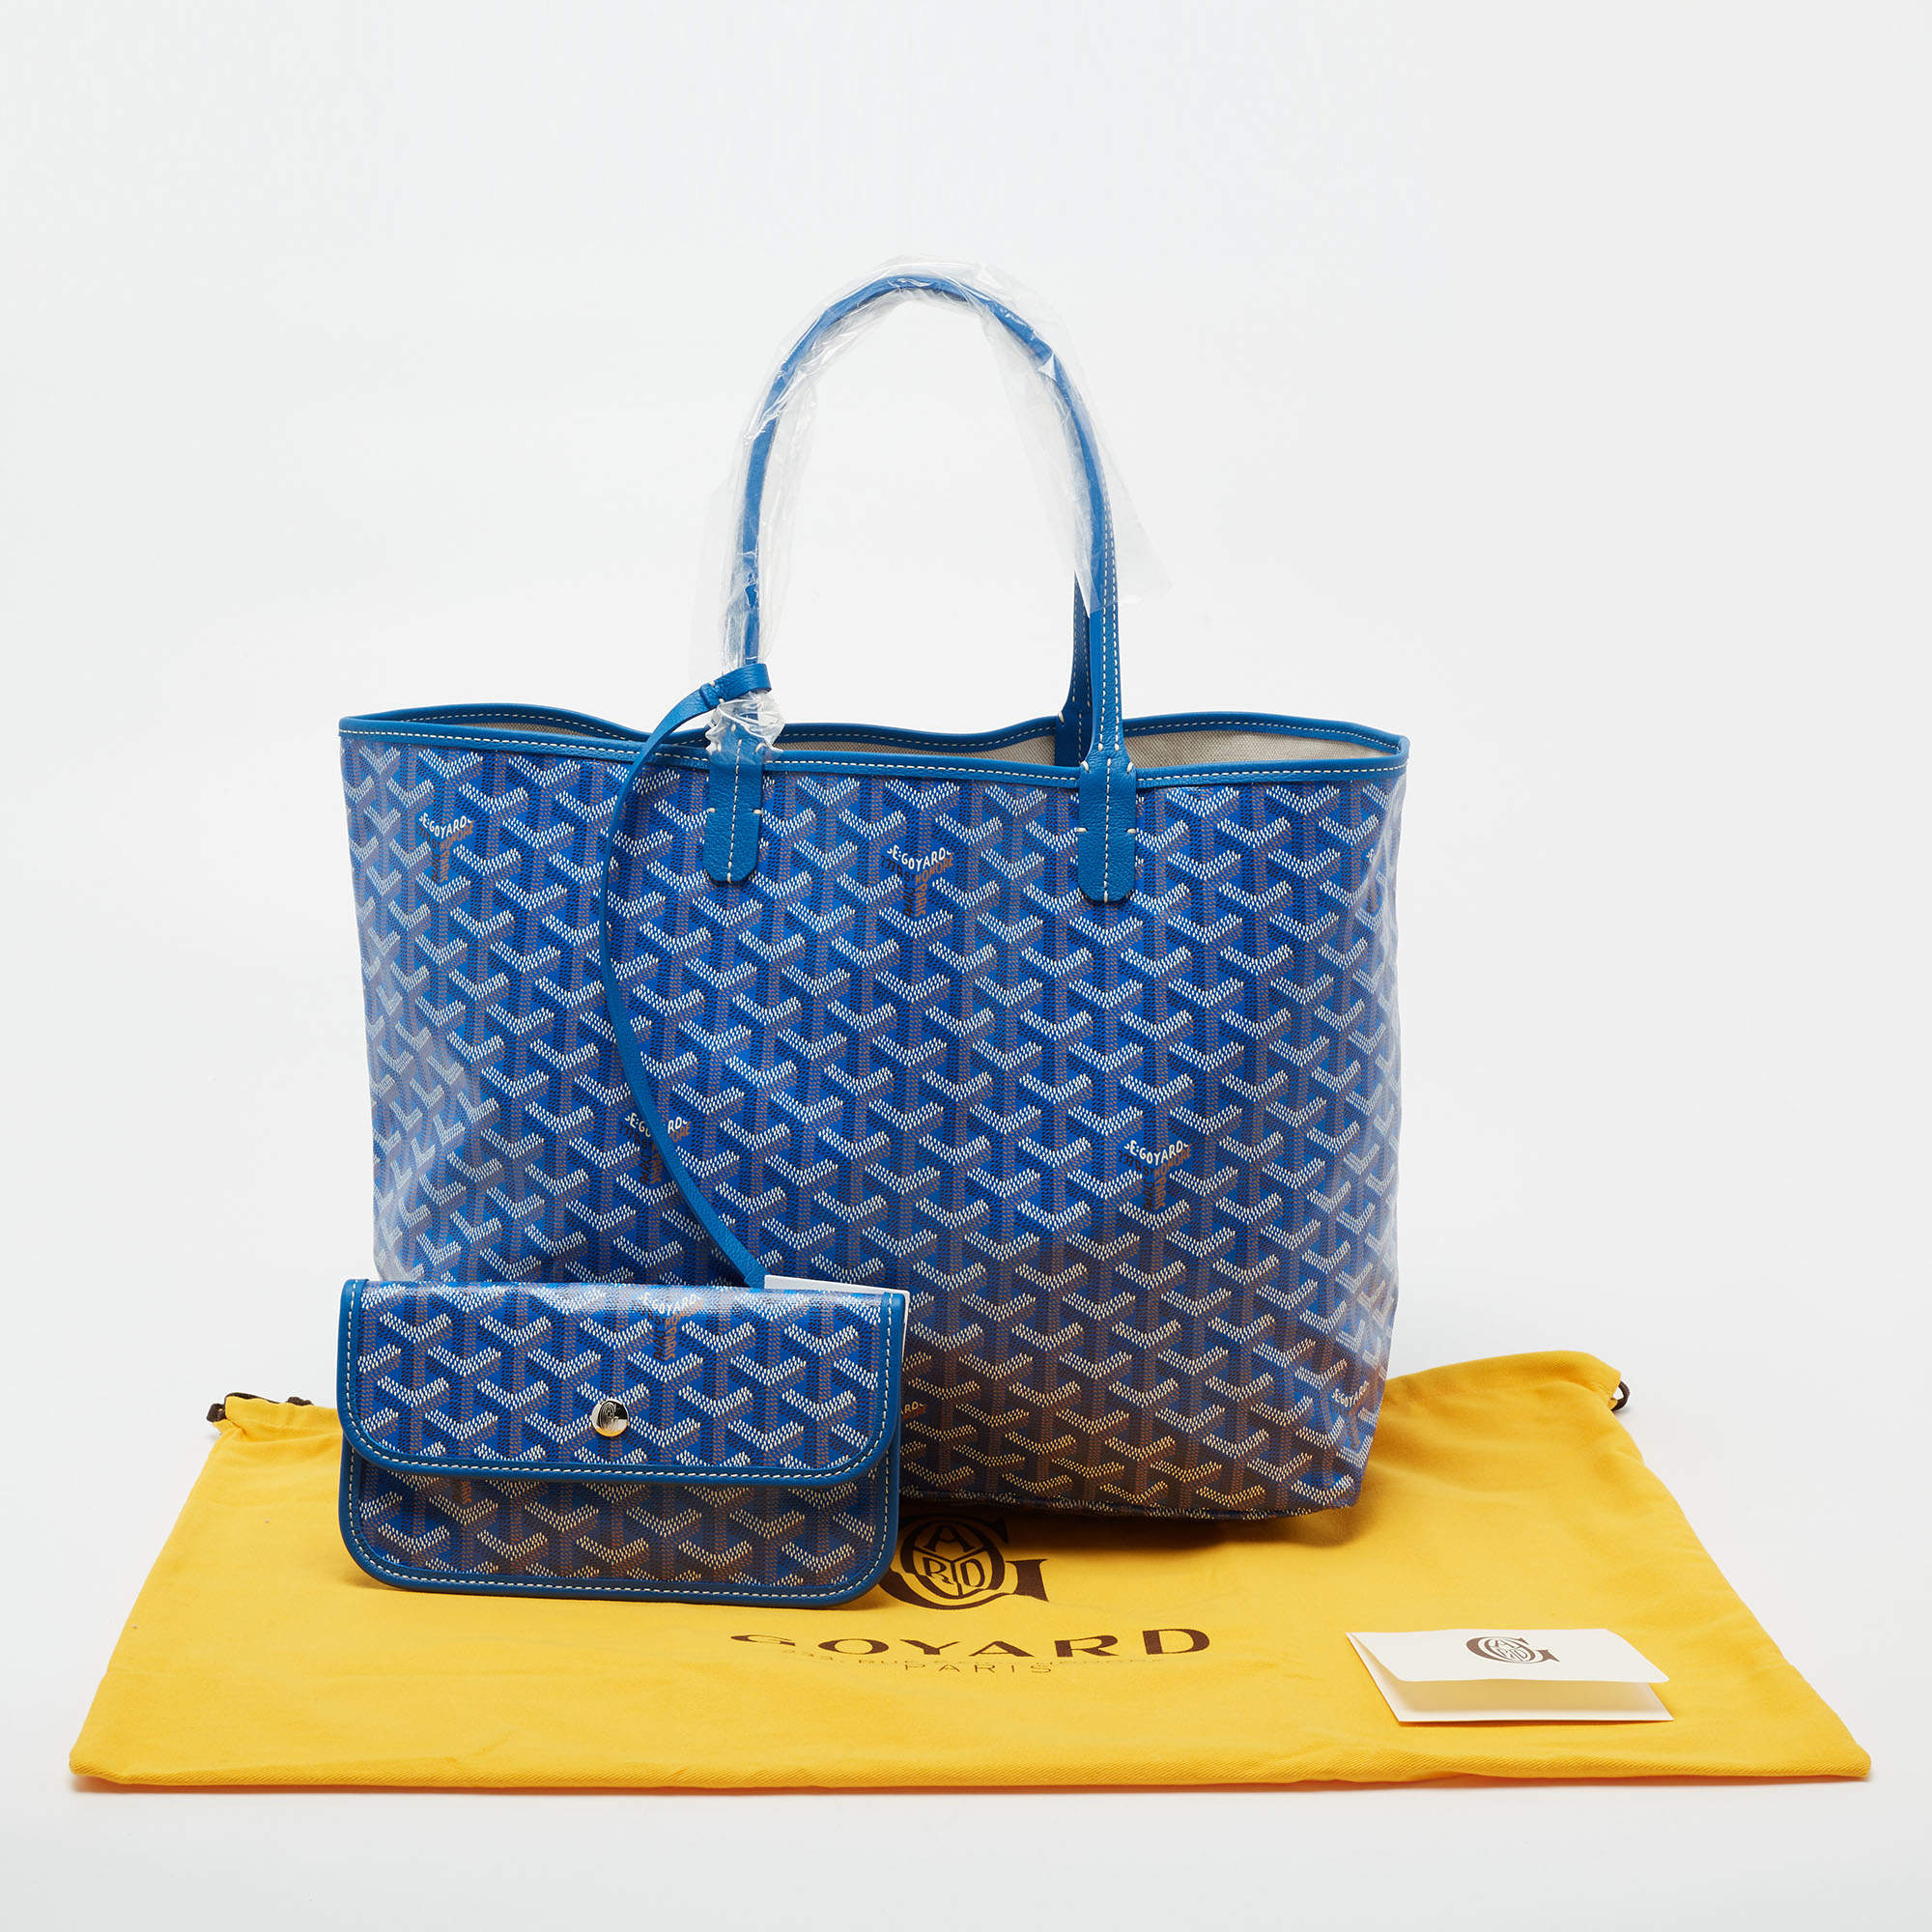 GoyardOfficial on X: The Étoile suitcase in blue goyardine canvas and  leather, silver jewelry, PM size.  / X